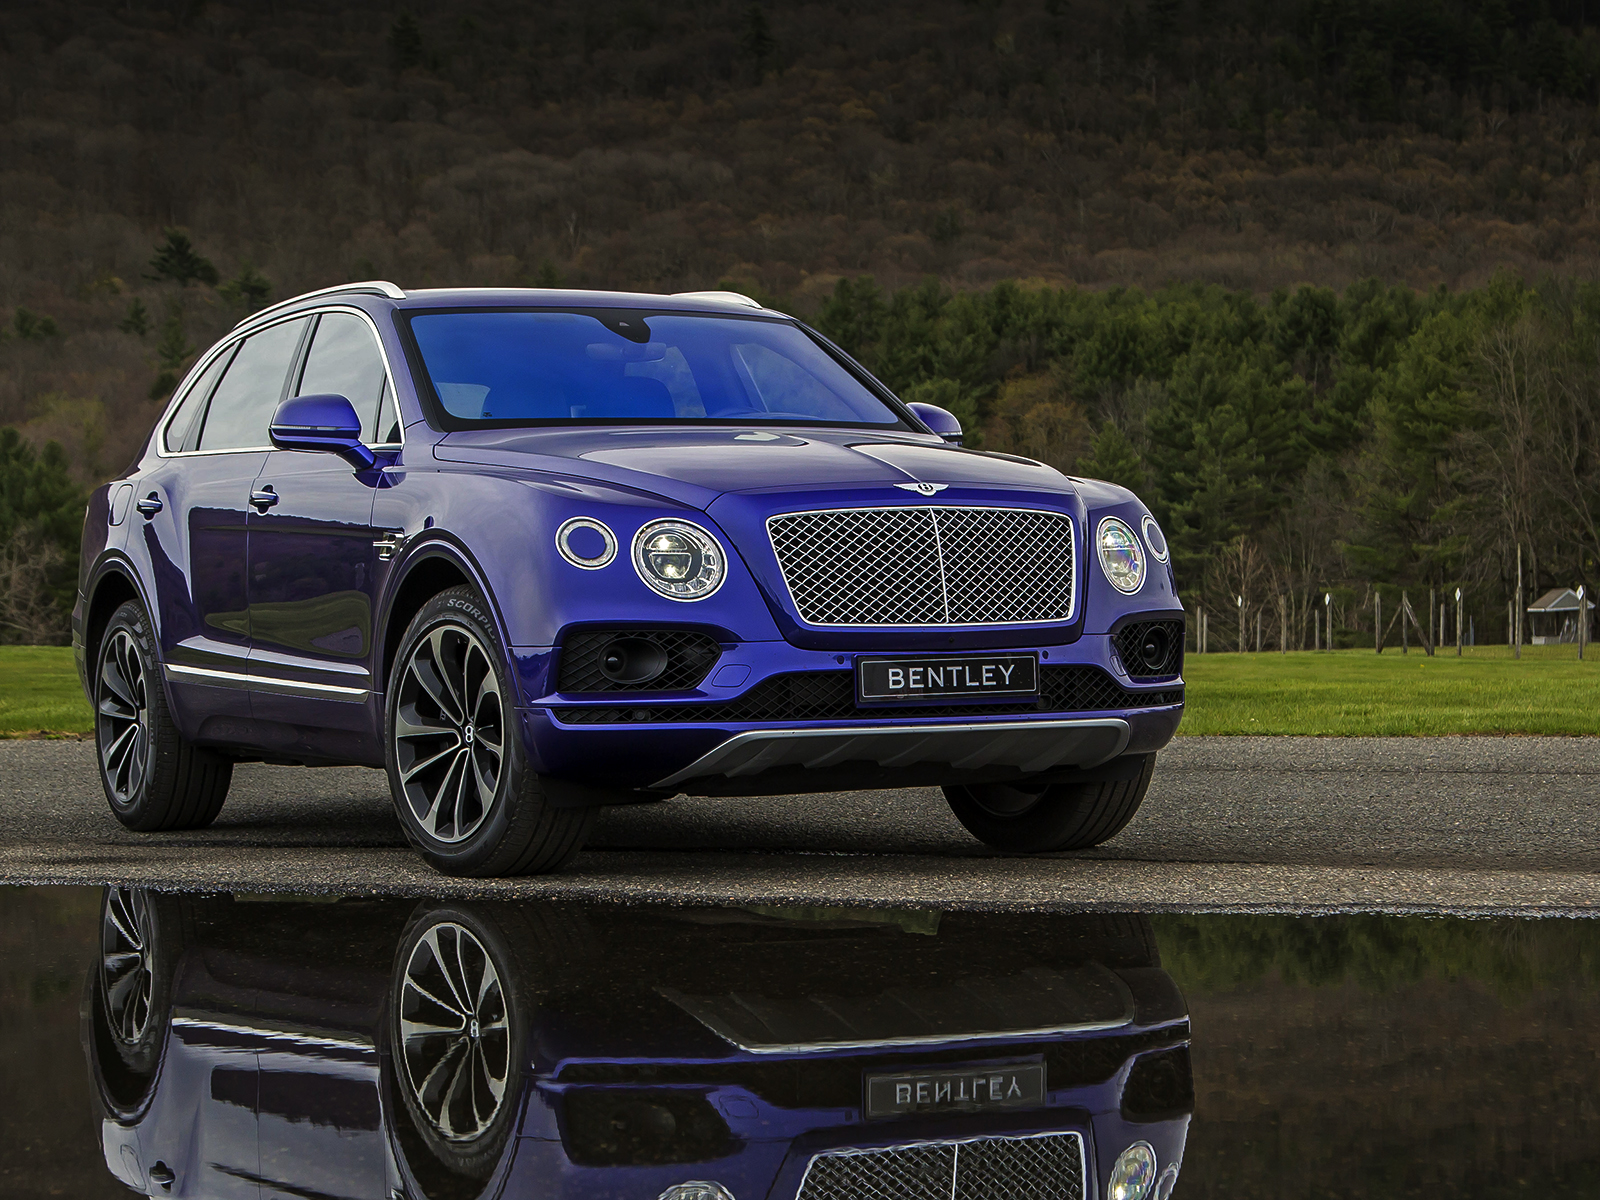 How Much Is A New Bentley Suv 